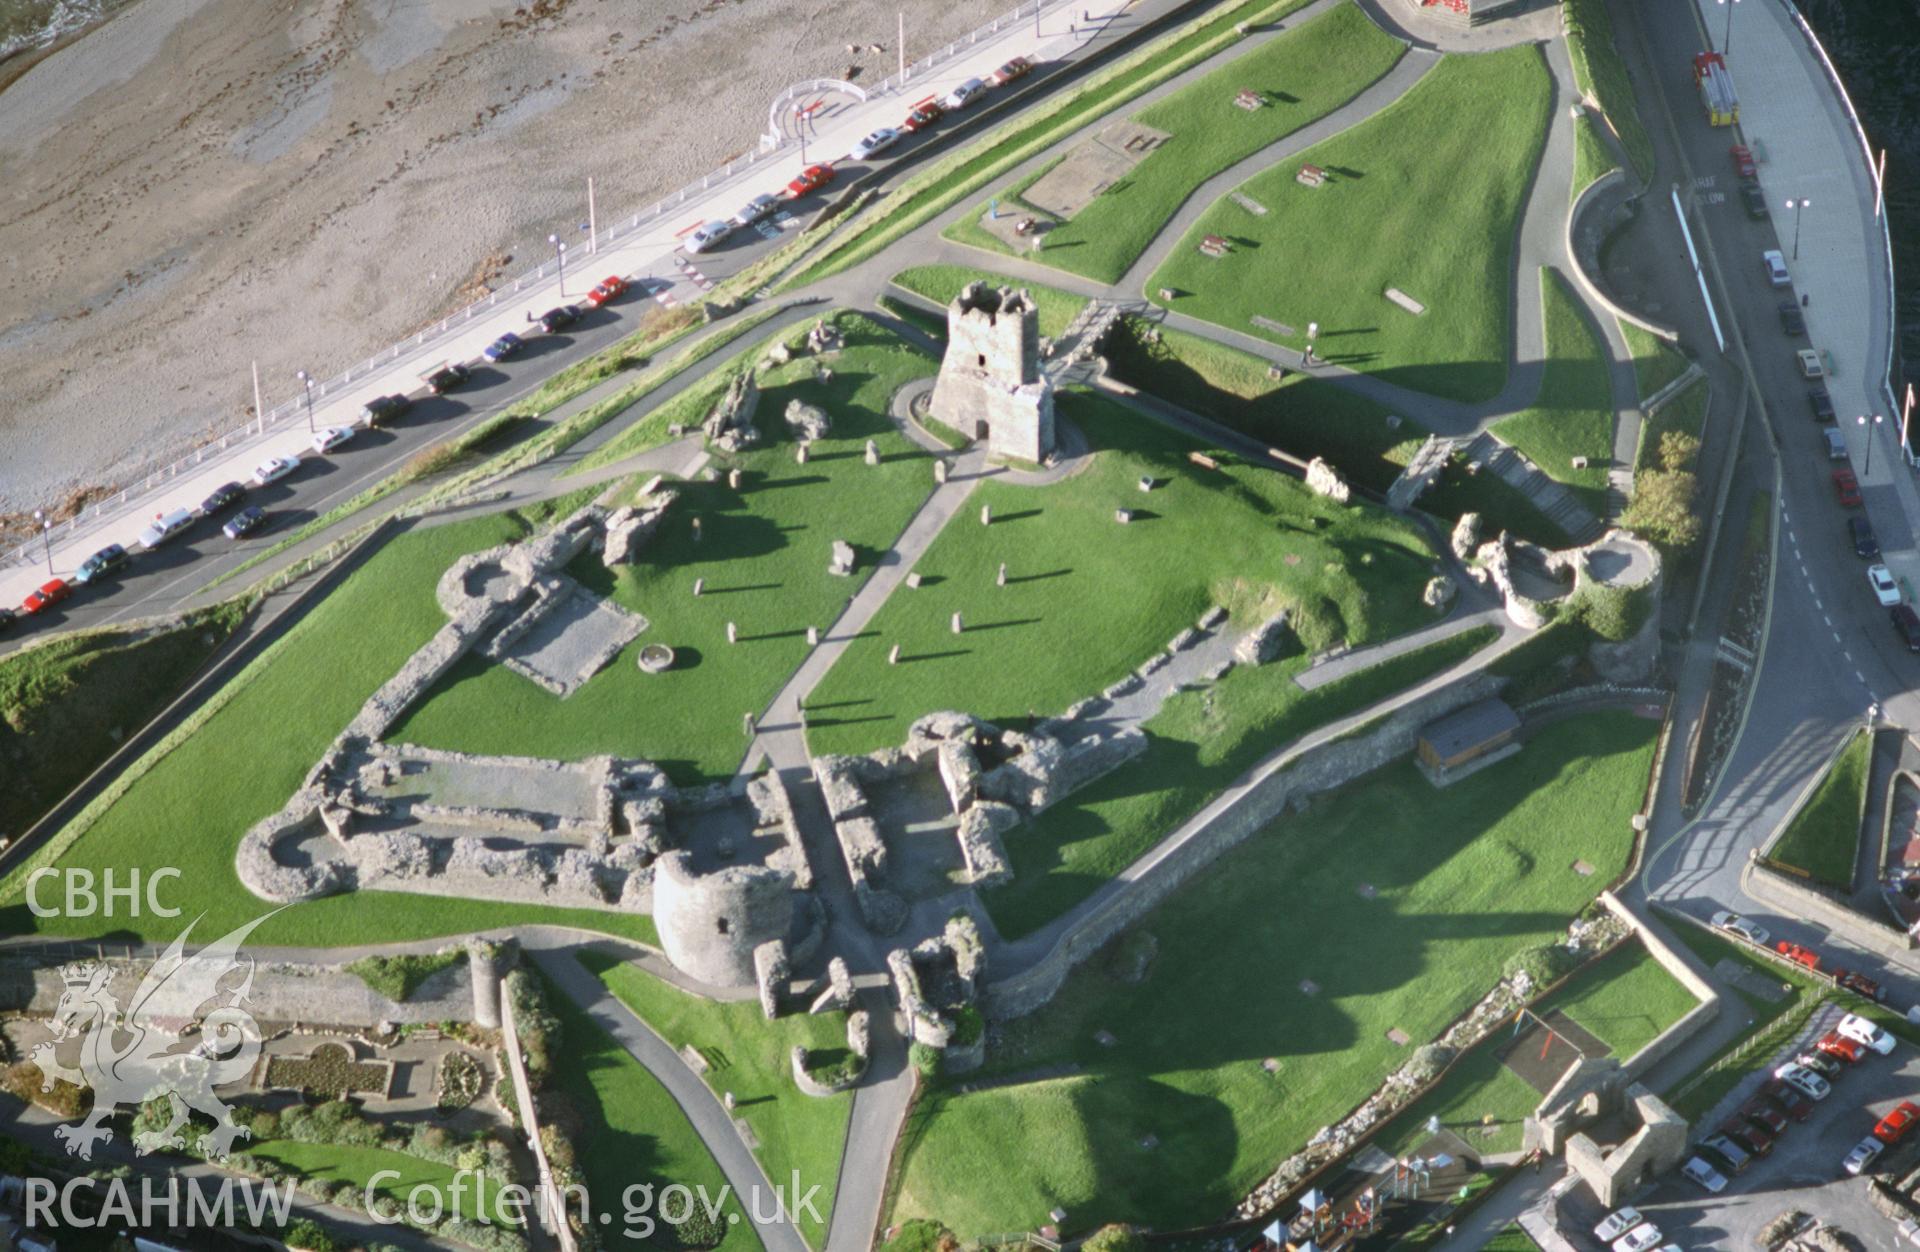 Slide of RCAHMW colour oblique aerial photograph of Aberystwyth Castle, taken by T.G. Driver, 2001.